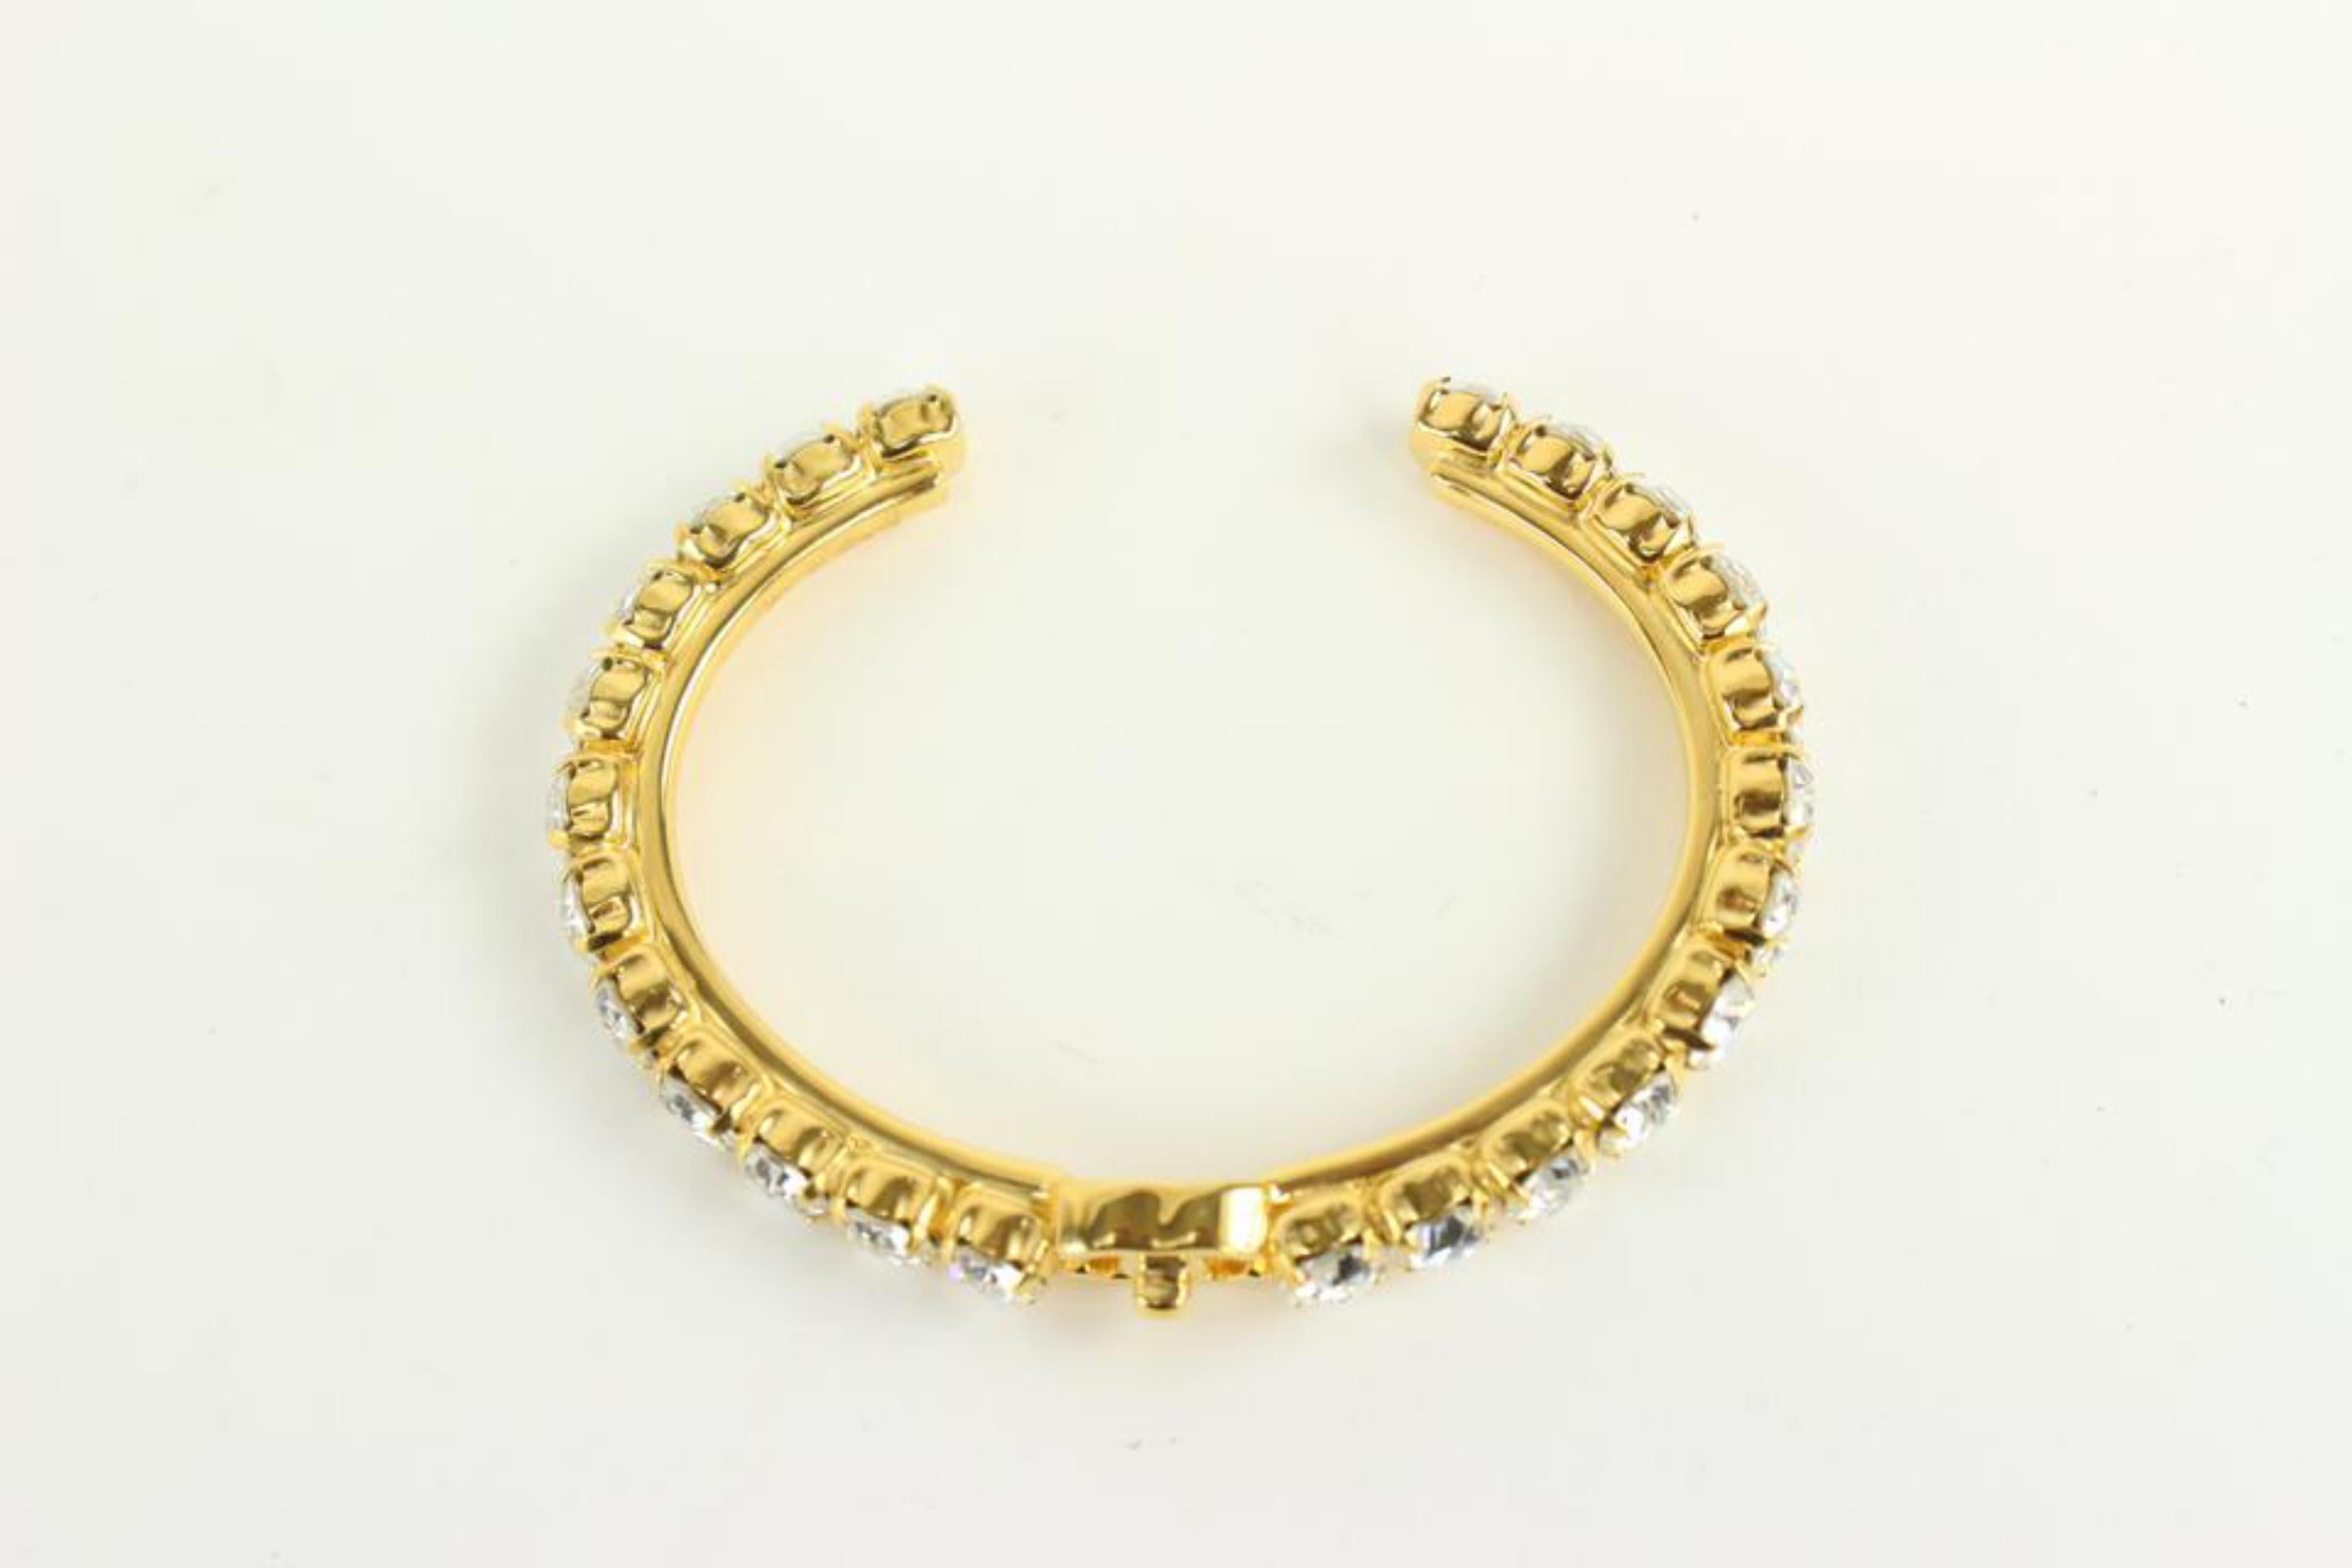 Chanel B20A Gold Crystal More is More CC Turnlock Bangle Bracelet Cuff 1118c6 2